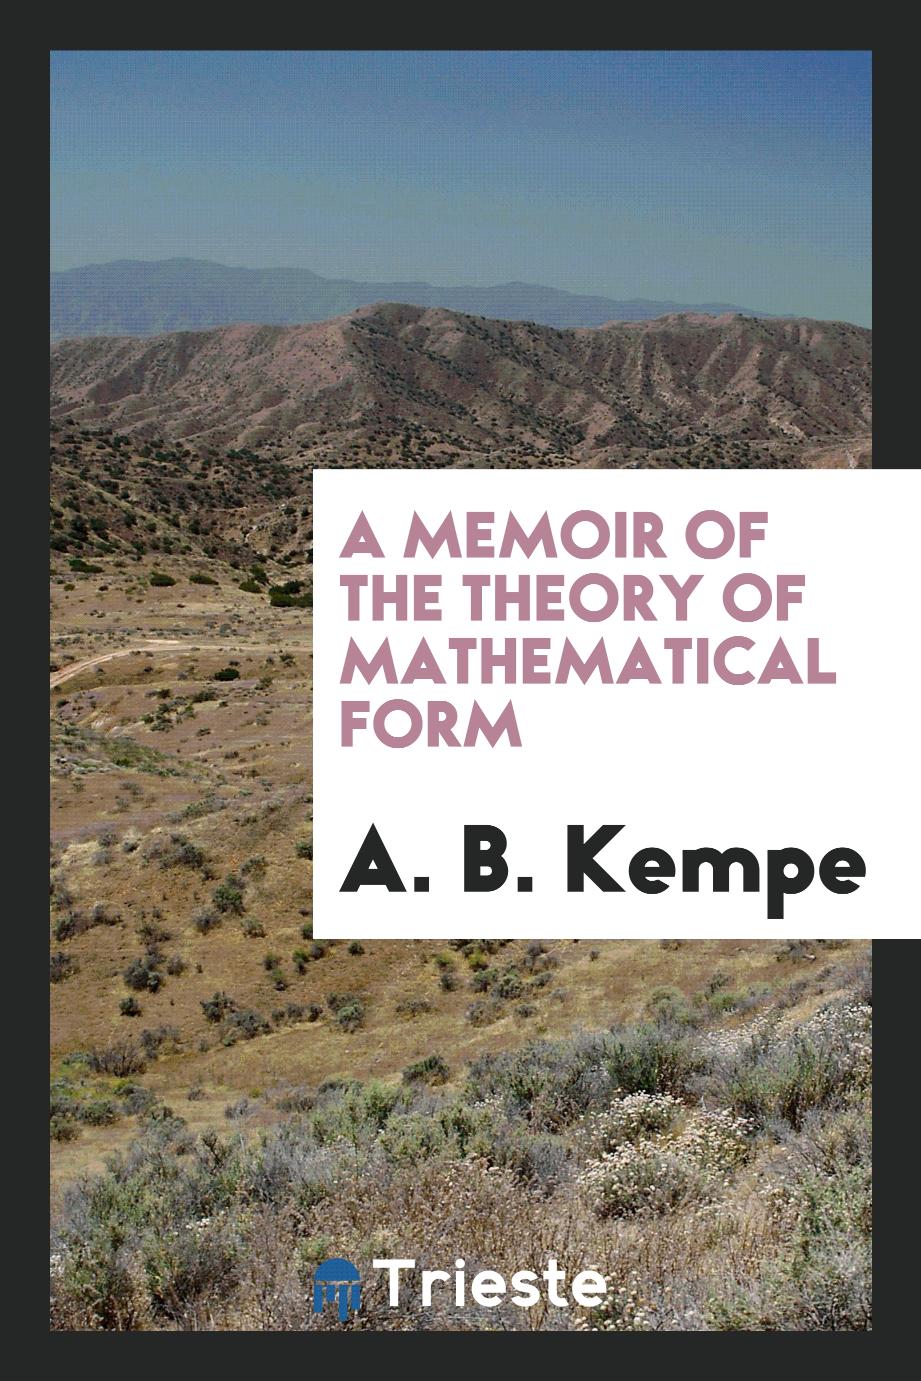 A. B. Kempe - A Memoir of the Theory of Mathematical Form